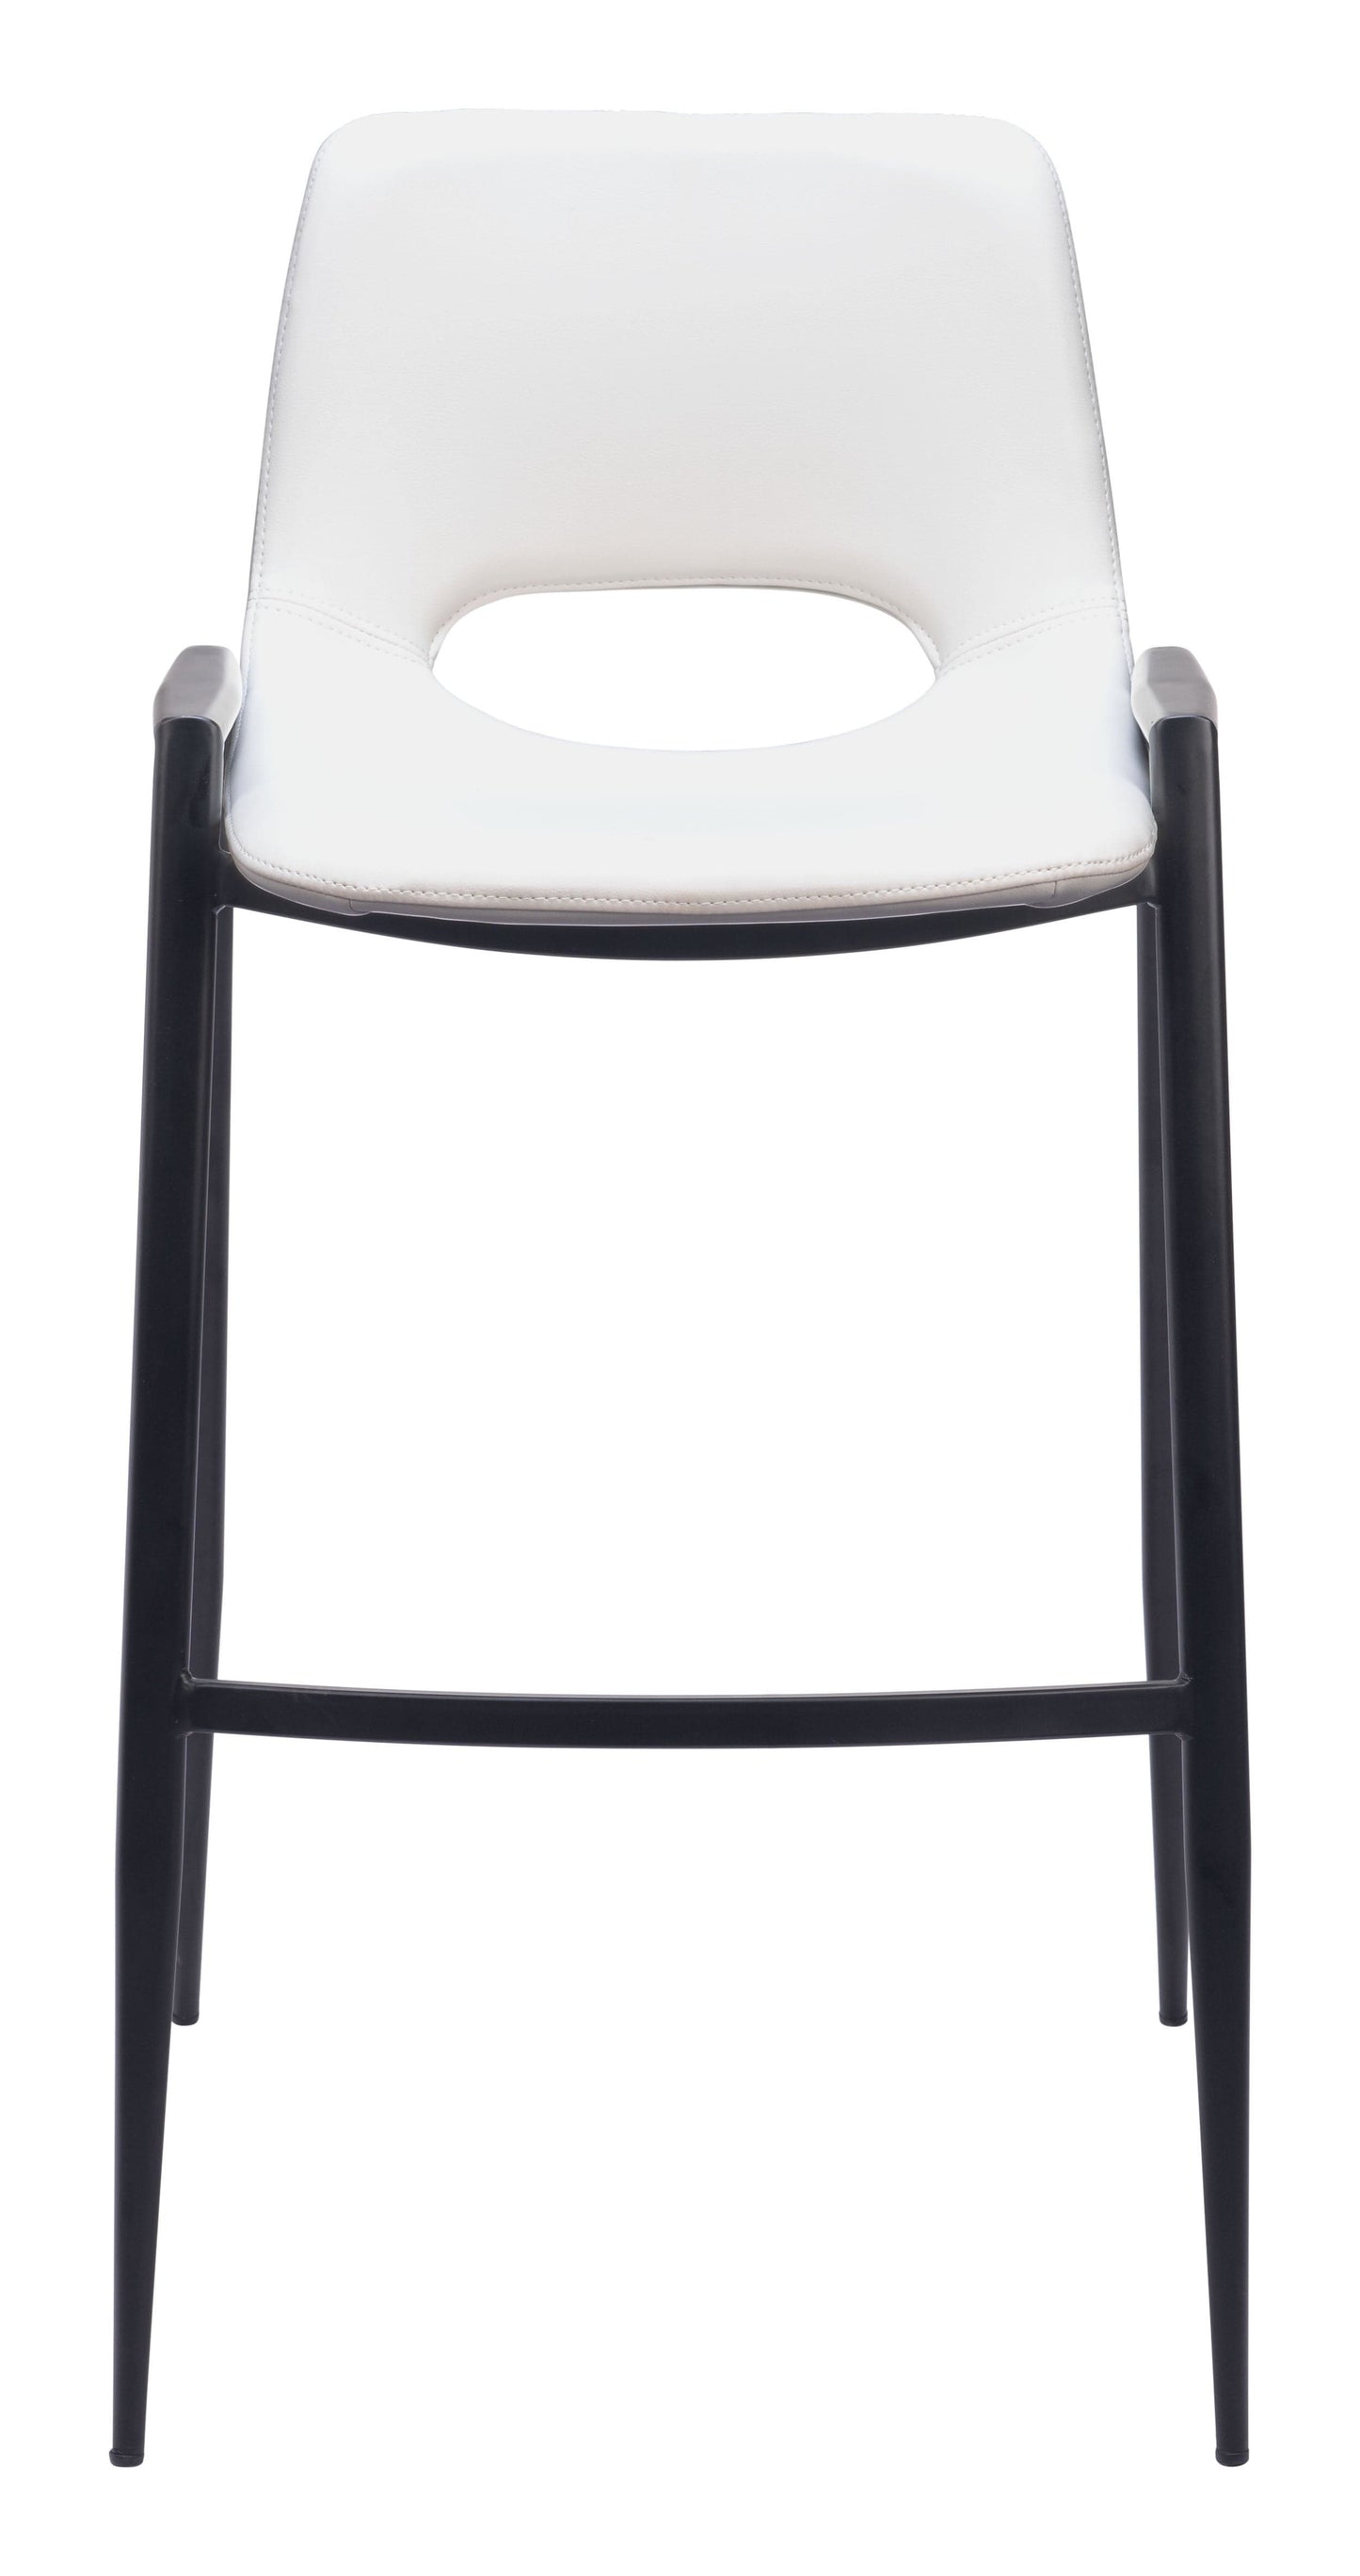 Front View of Modern Stool